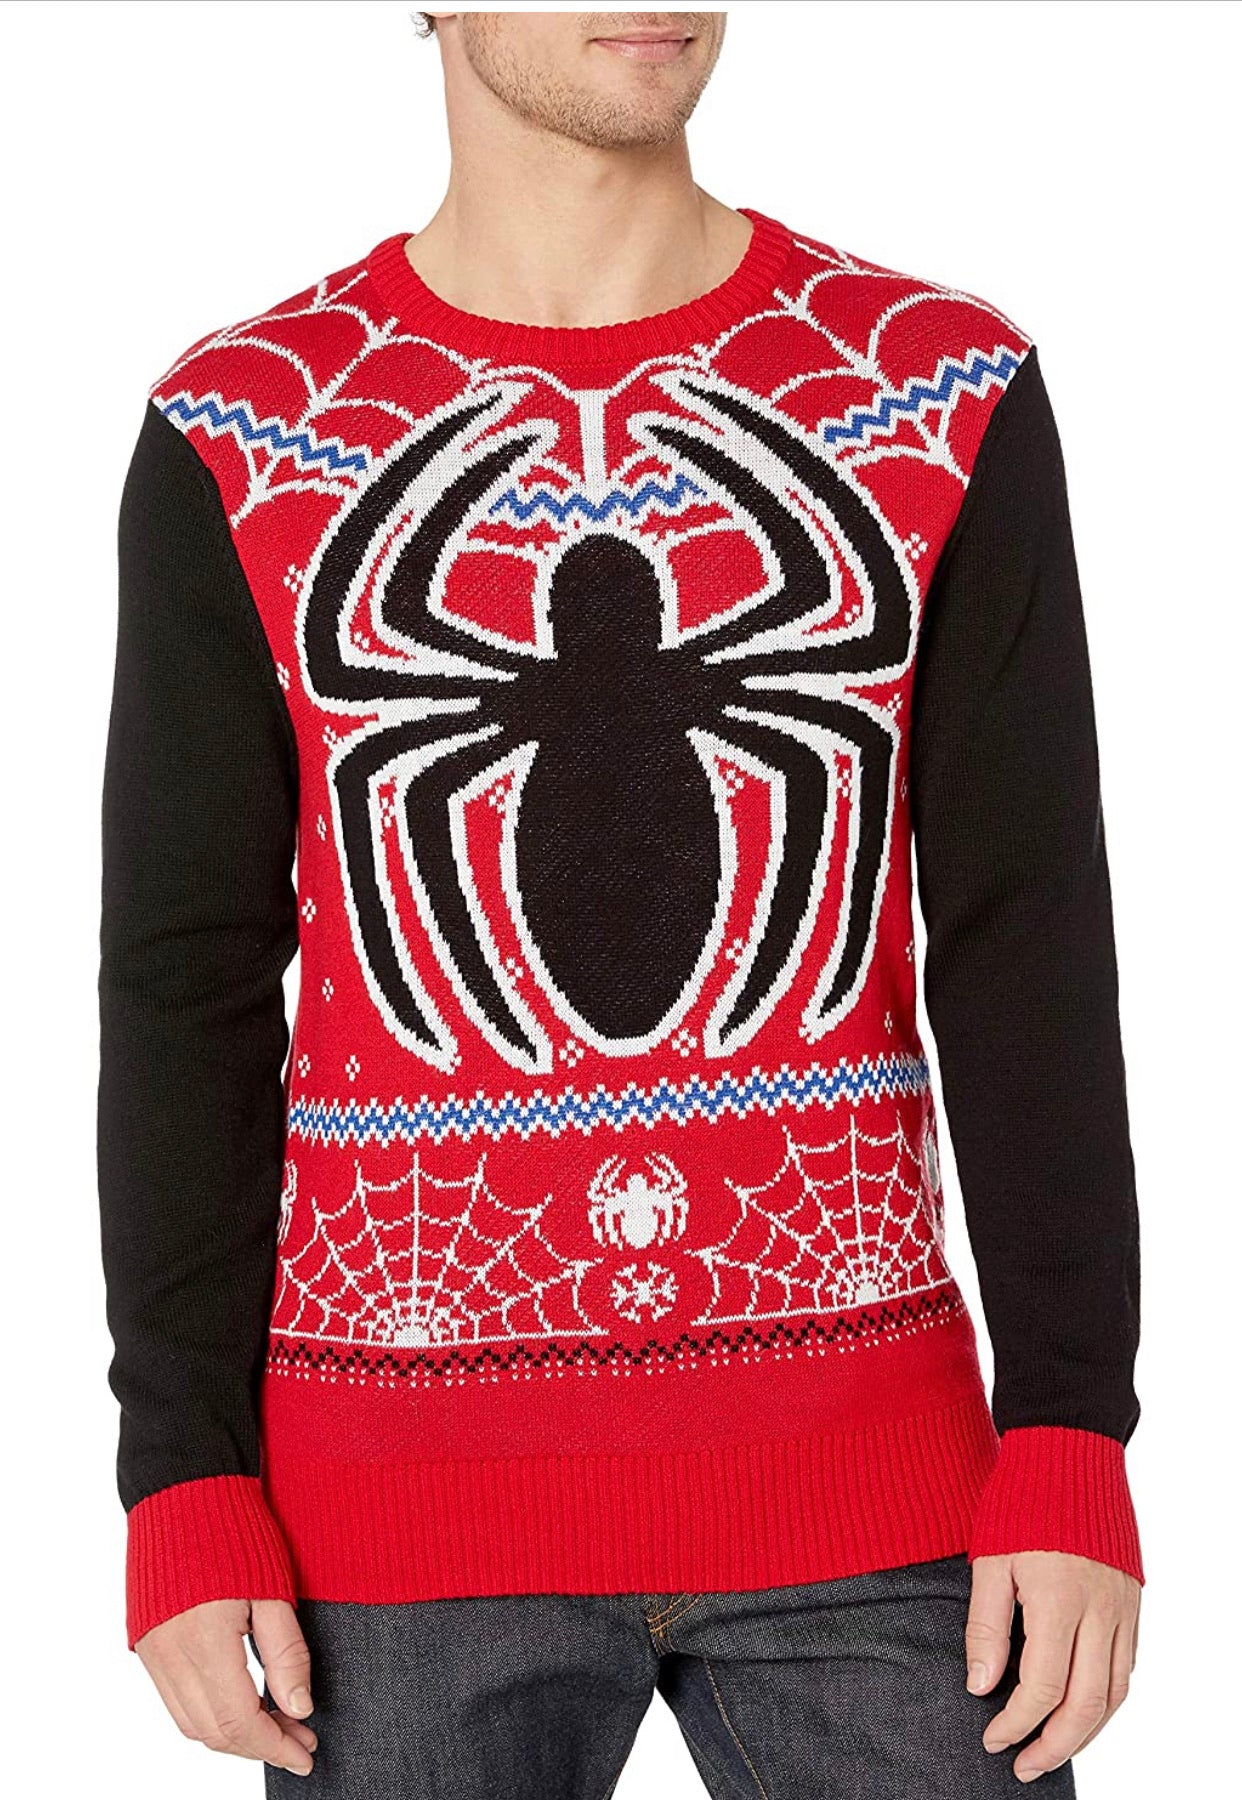 Spider Man Ugly Sweater – Accesorios-Mexicali